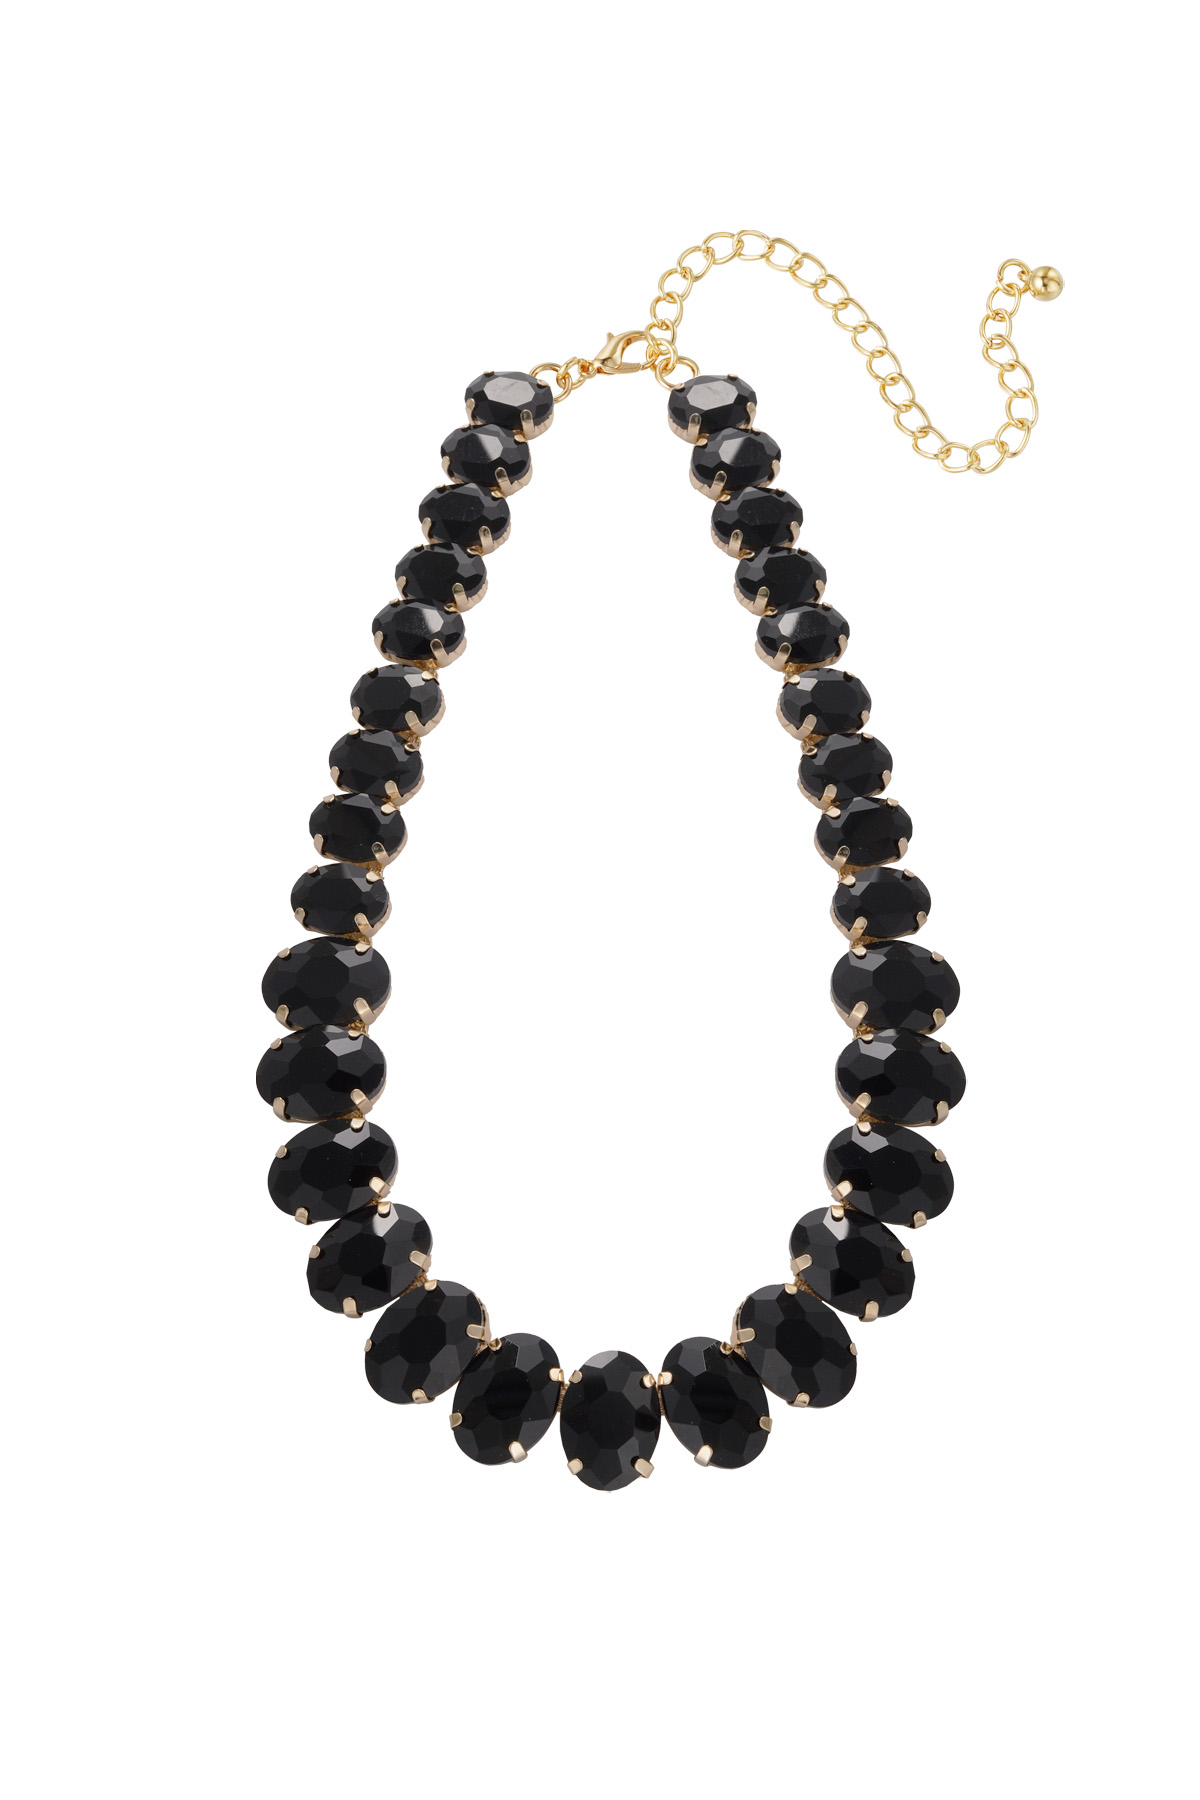 Necklace large oval beads - black